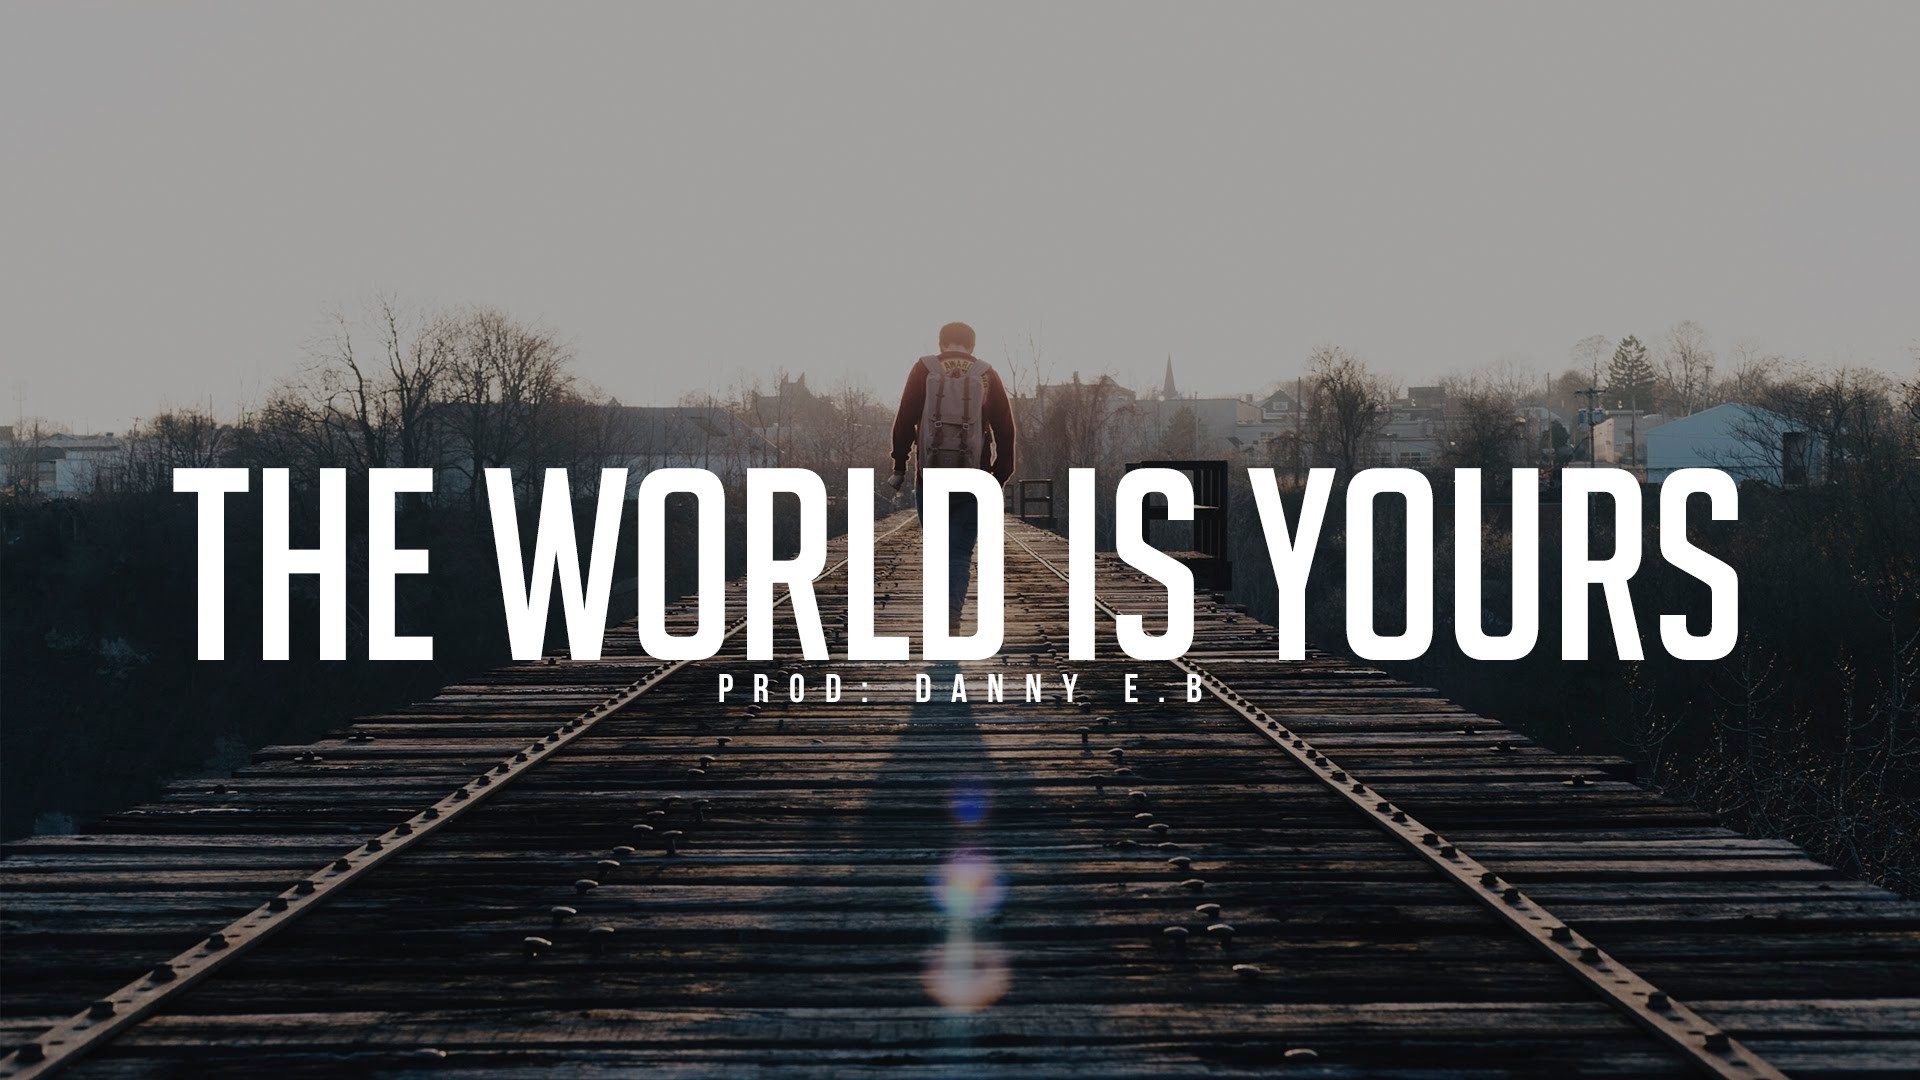 1920x1080 "The world is yours" - Piano x Drums Instrumental (Prod: Danny E.B)